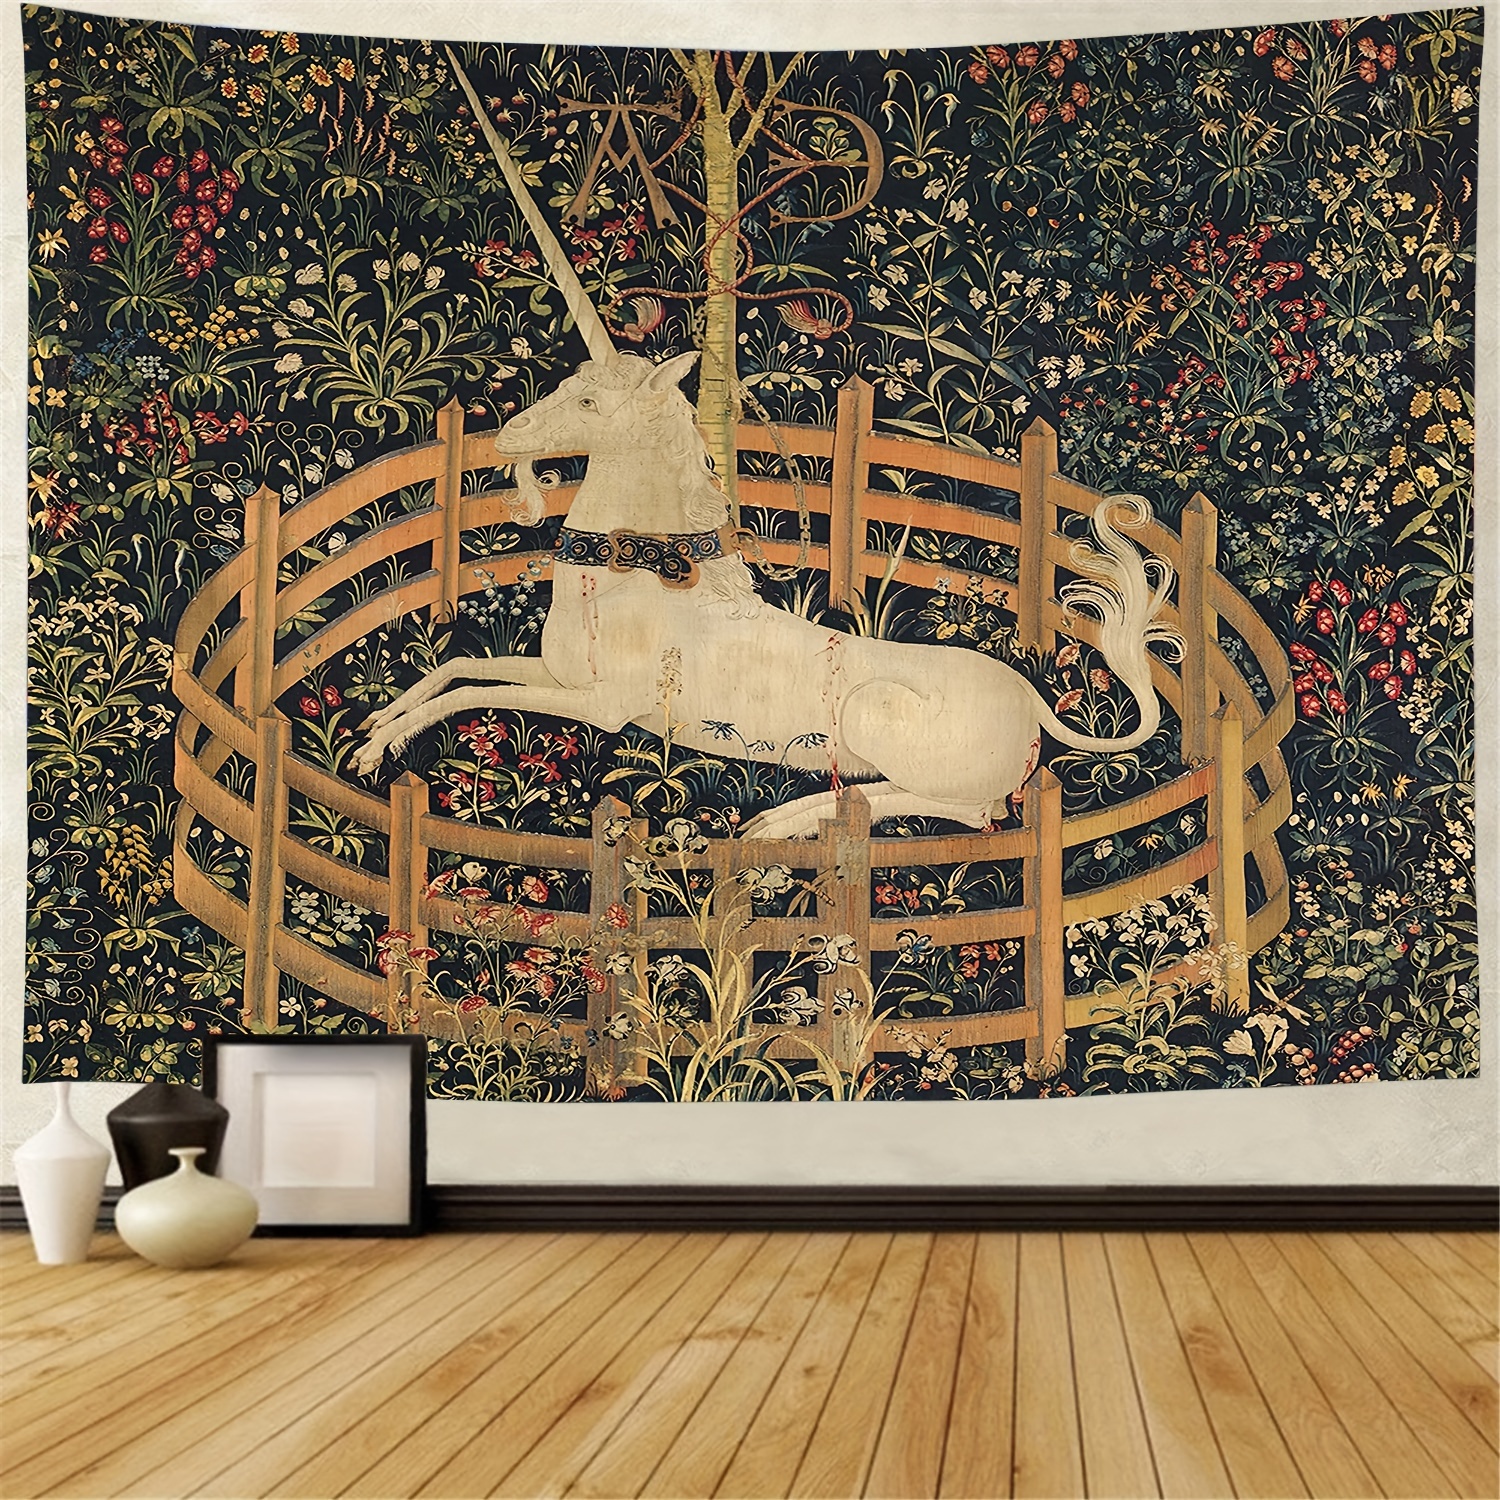 

1pc Unicorn Floral Print Tapestry, Polyester Tapestry, Wall Hanging For Living Room Bedroom Office, Home Decor Room Decor Party Decor, With Free Installation Package